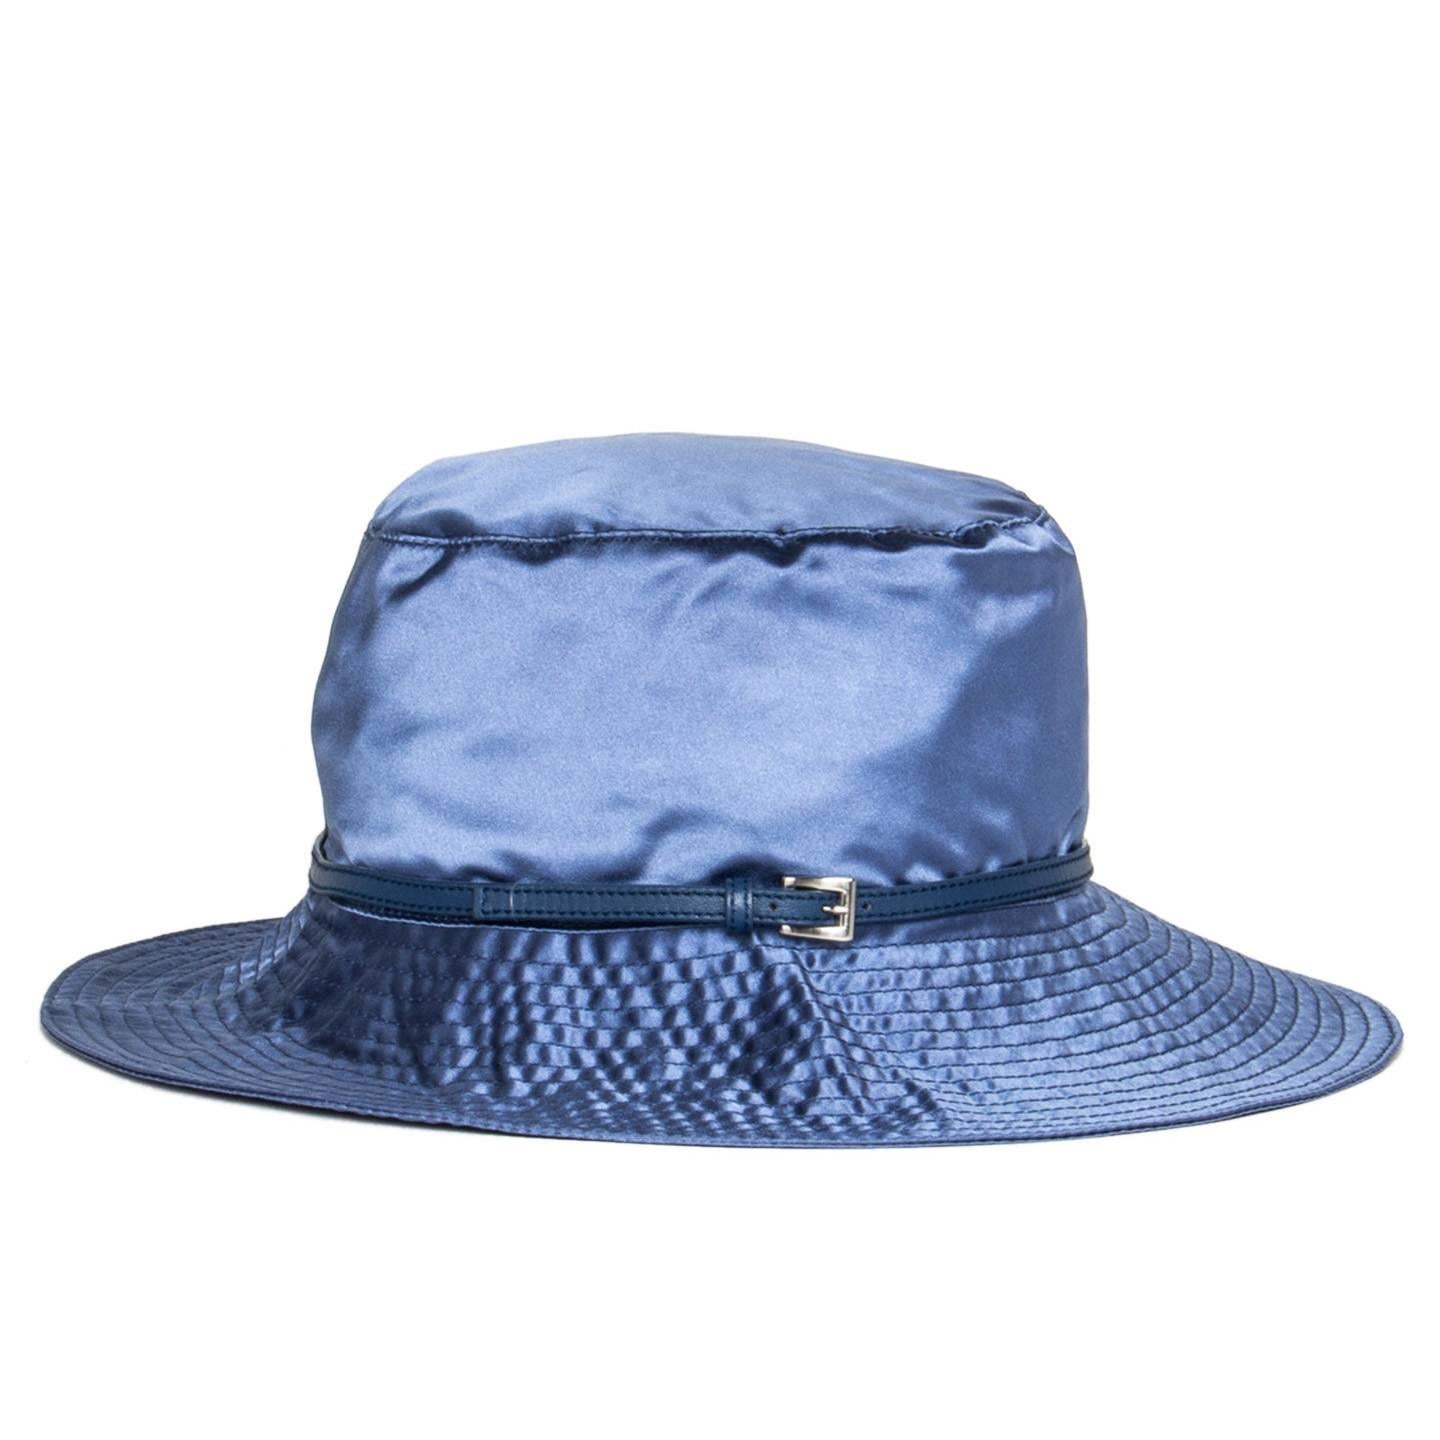 Prada royal blue silk hat with medium brim embellished by stitching details and a thin leather band that fastens with a small silver buckle.

Size  M Universal sizing

Condition  Excellent: worn a few times